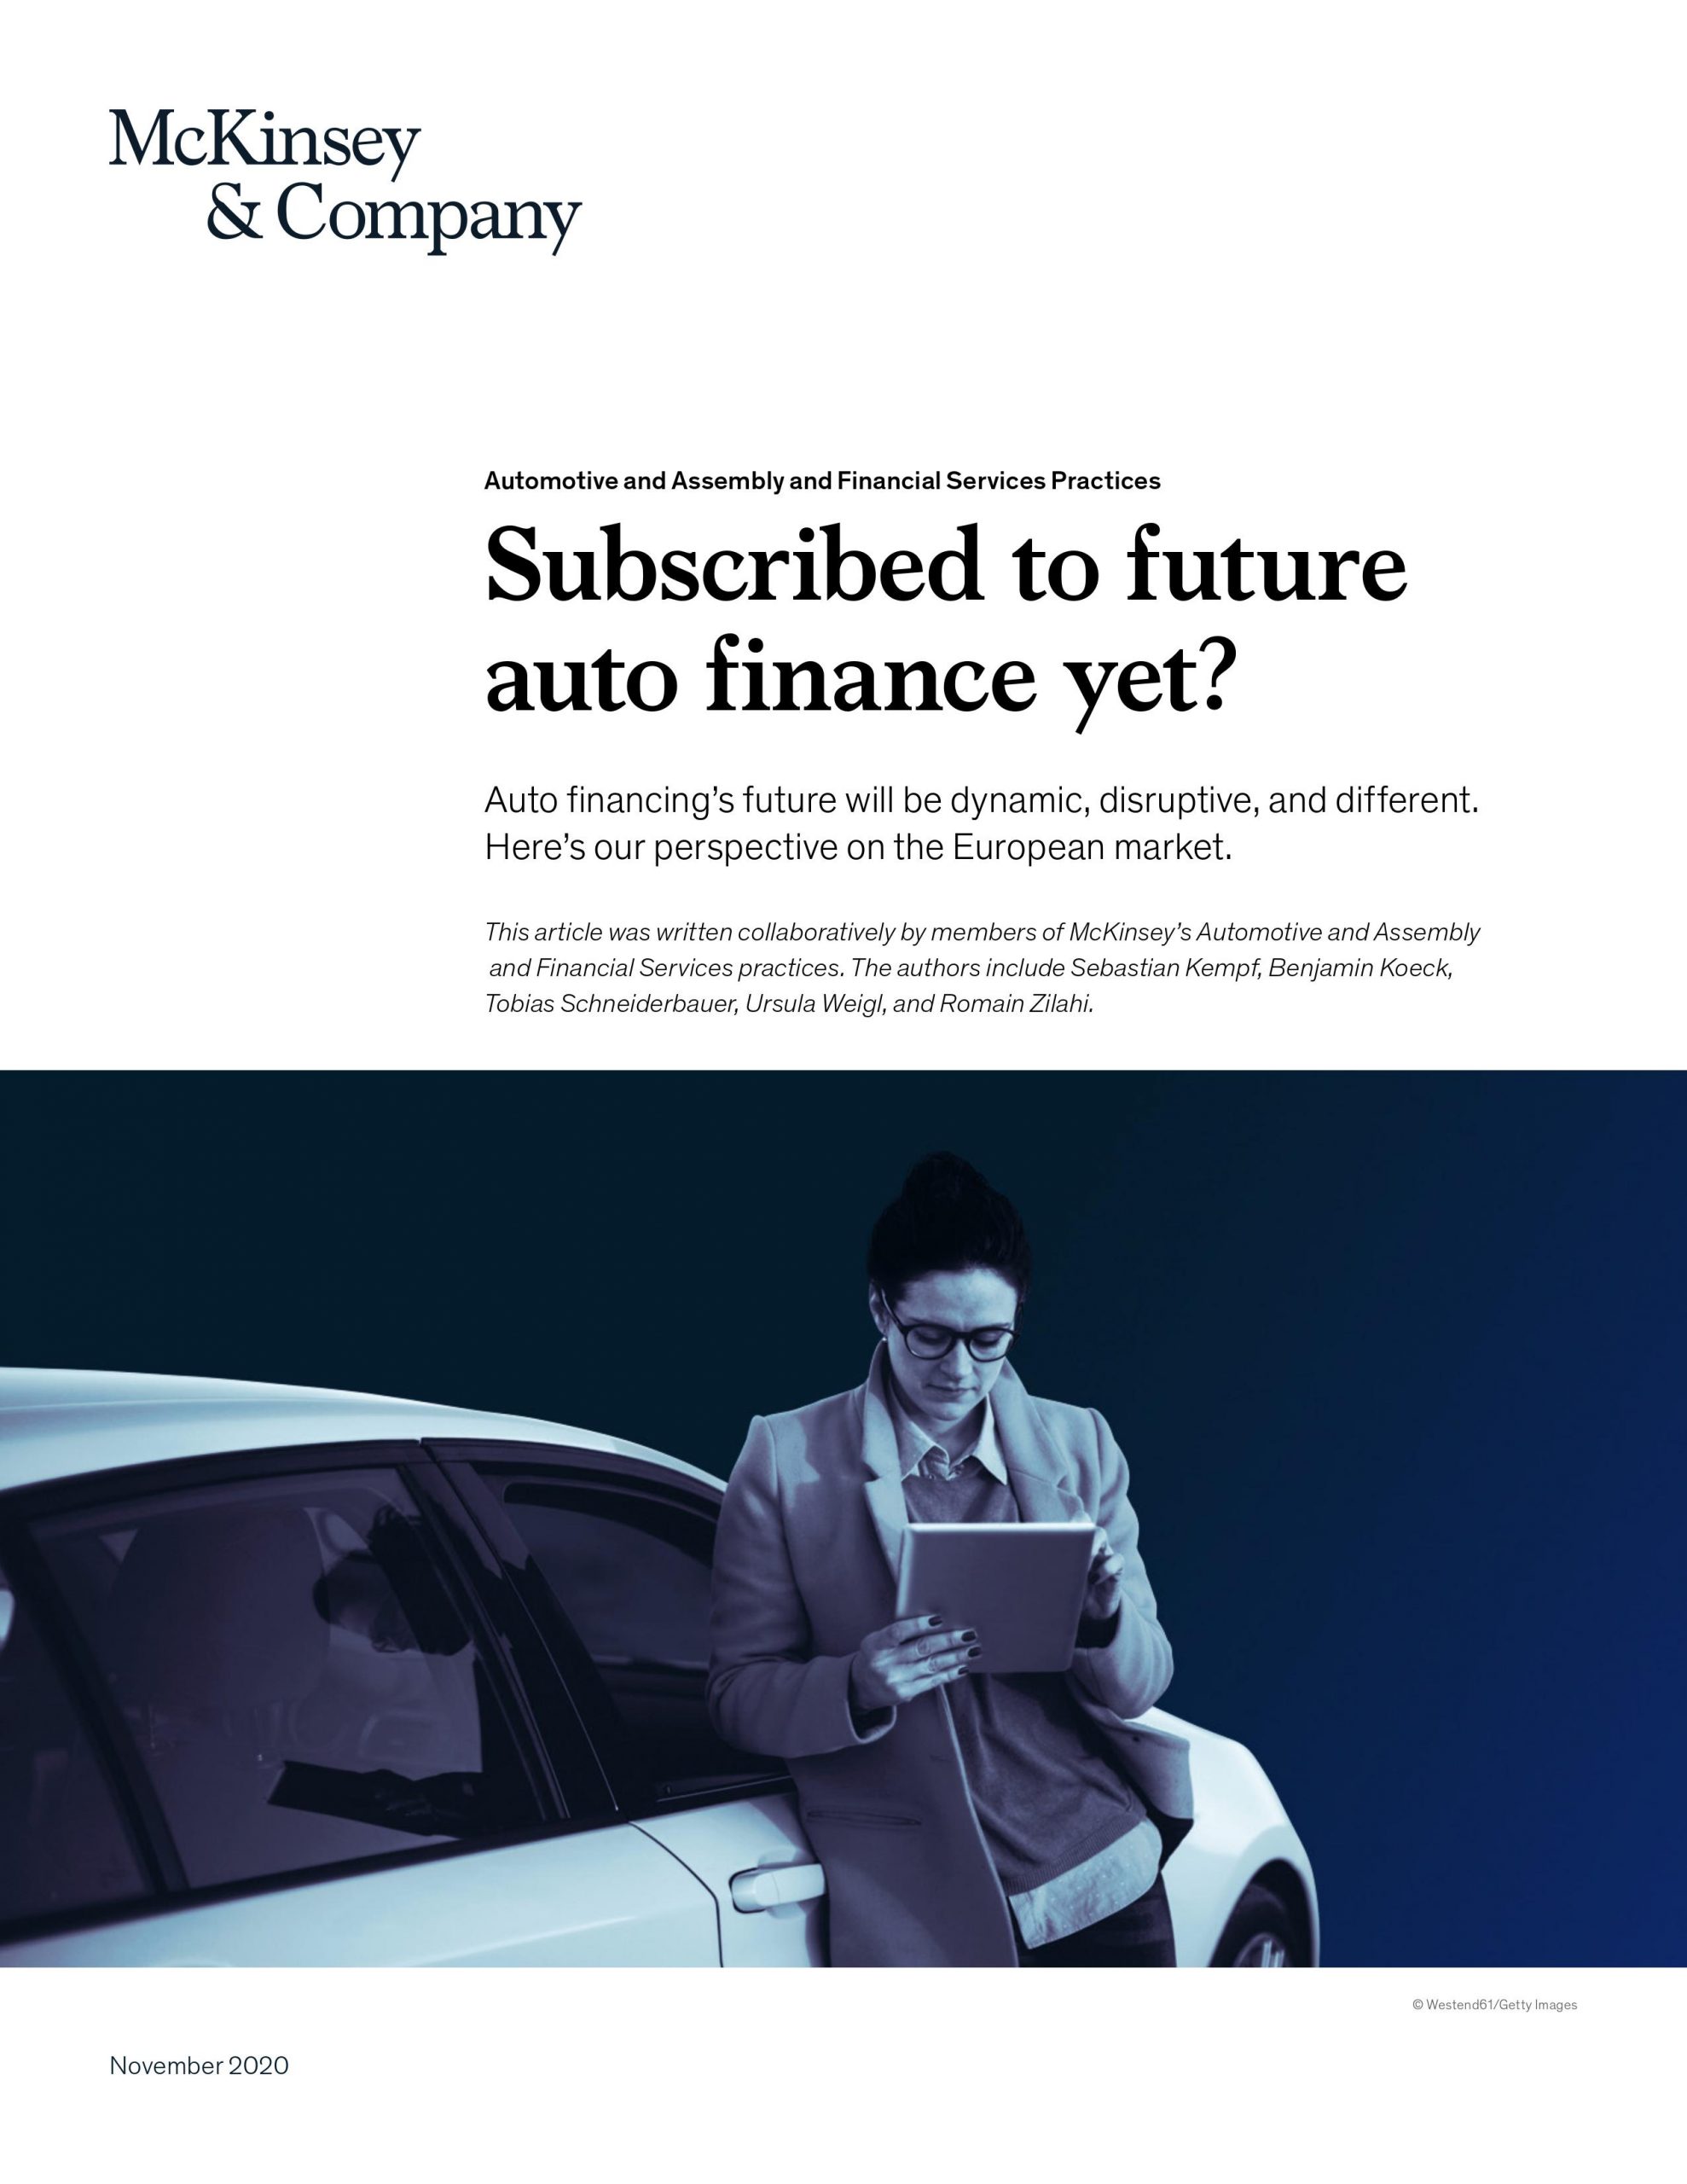 Subscribed to future auto finance yet?